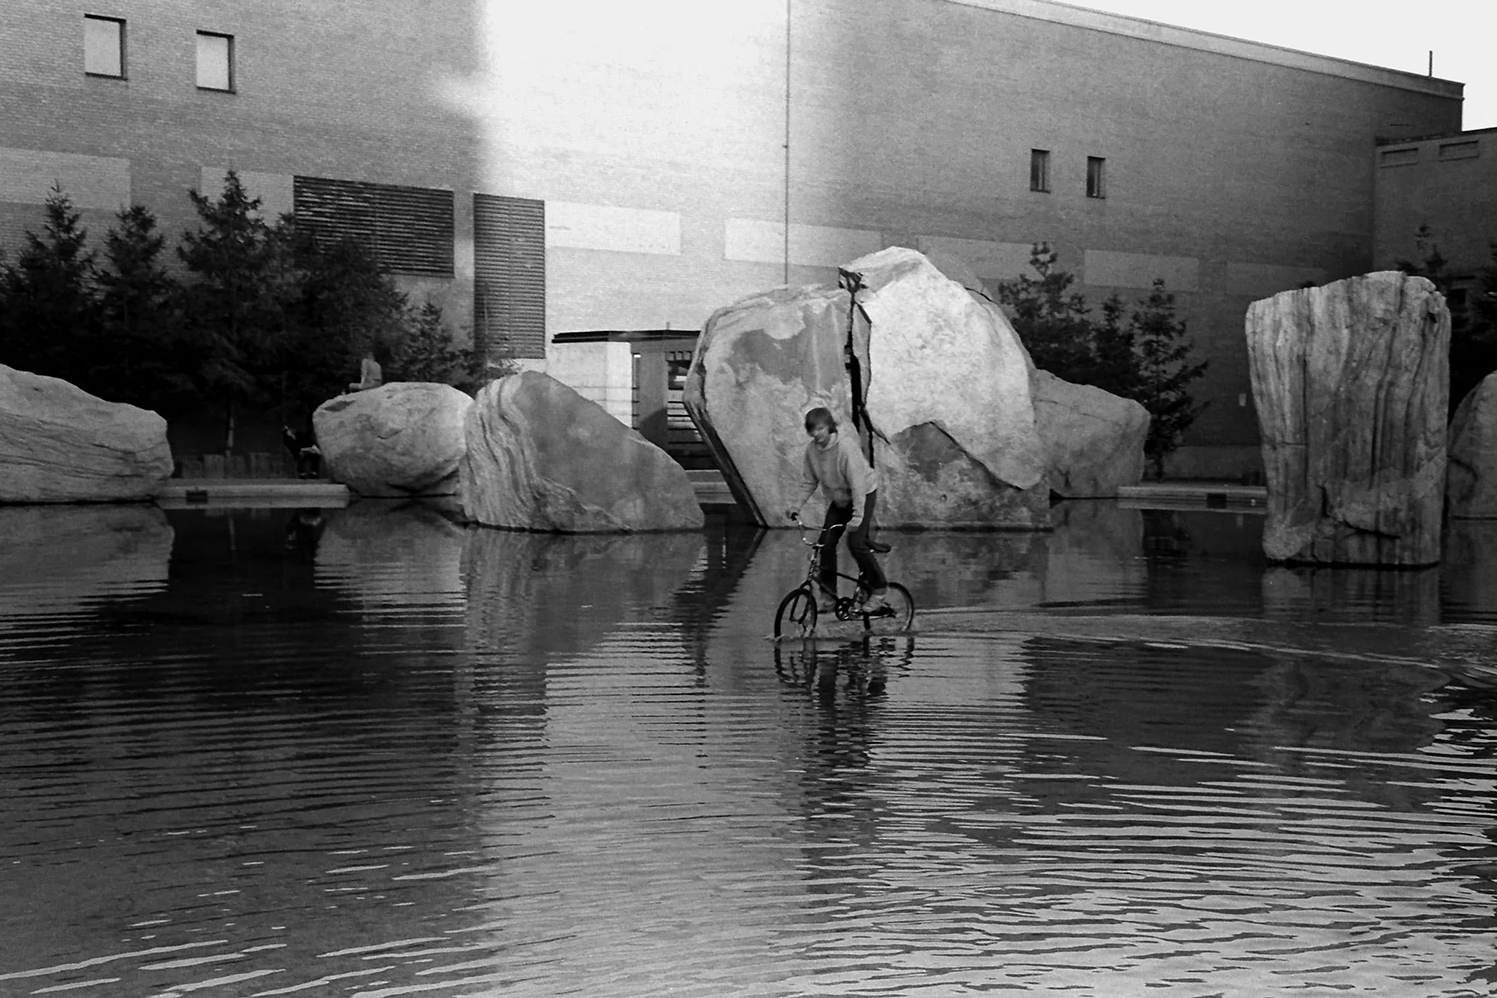 A young man rides a bicycle through Lake Devo in 1982